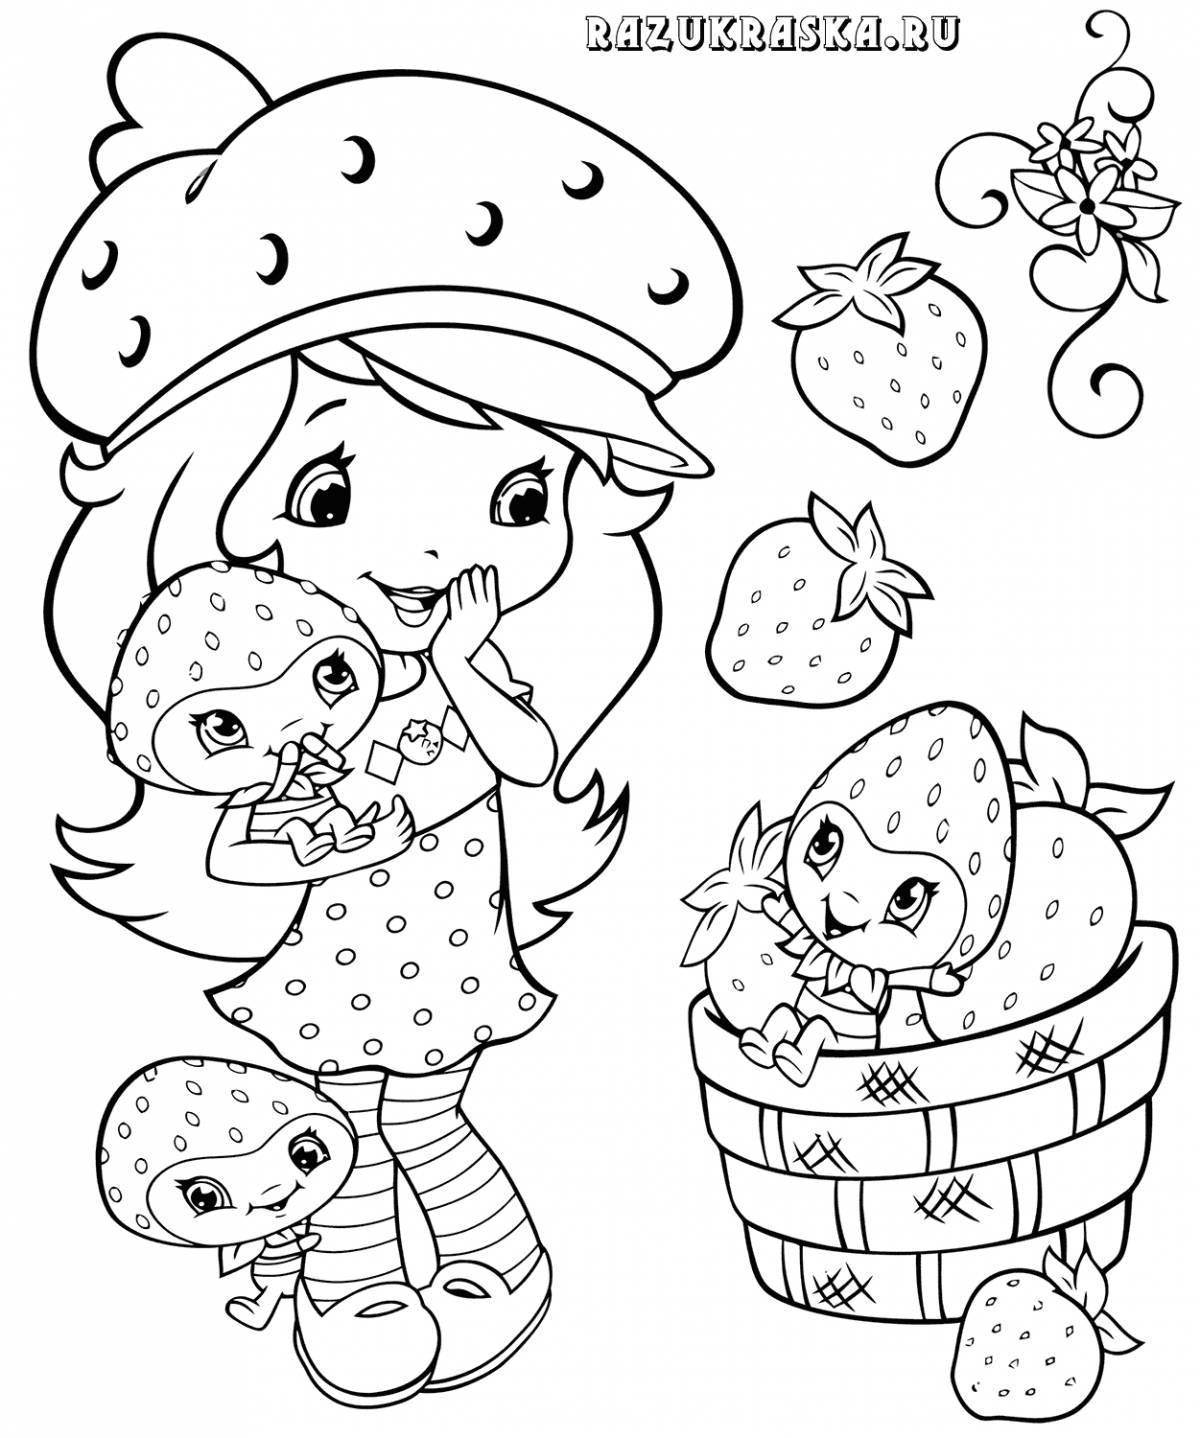 Innovative strawberry coloring page with berries